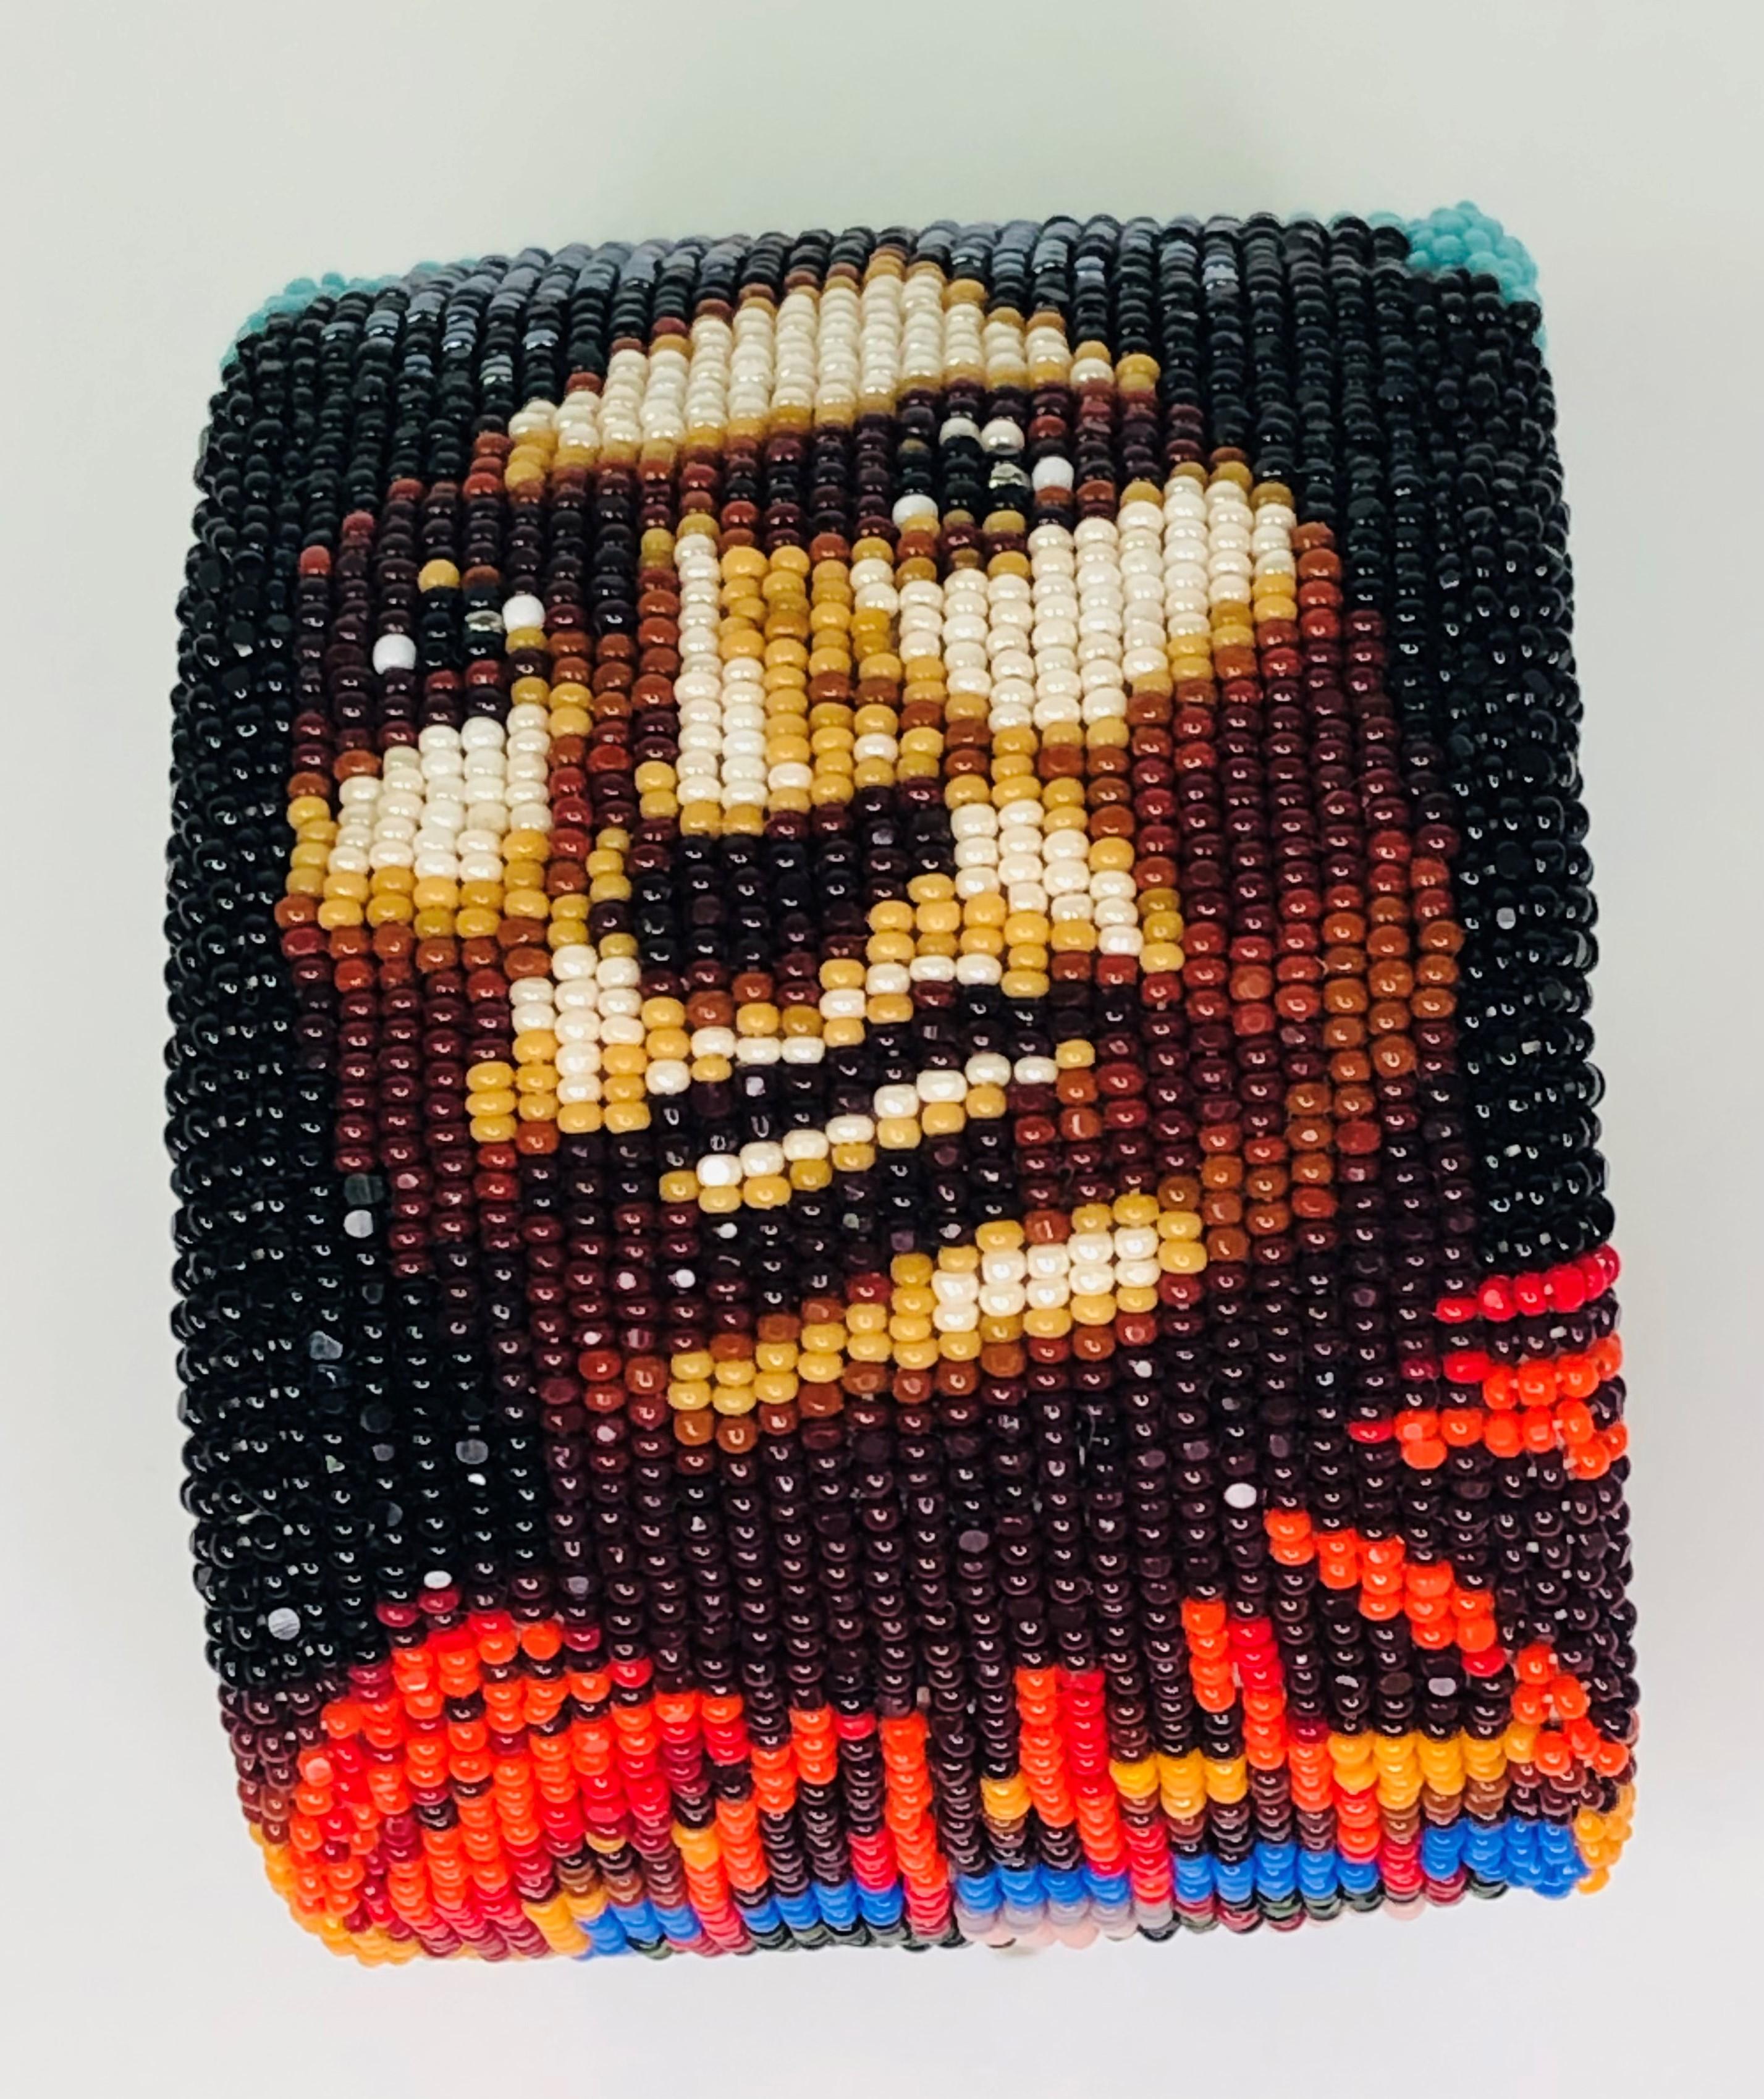 By famous Native American artist, Marcus Amerman, this bracelet is one-of-a-kind!  
The attention to detail and craftsmanship are unmatched.  
Glass beaded bracelet is a portrait of Scorched Lightning, (Assiiboine) Sioux Nation shows his face and